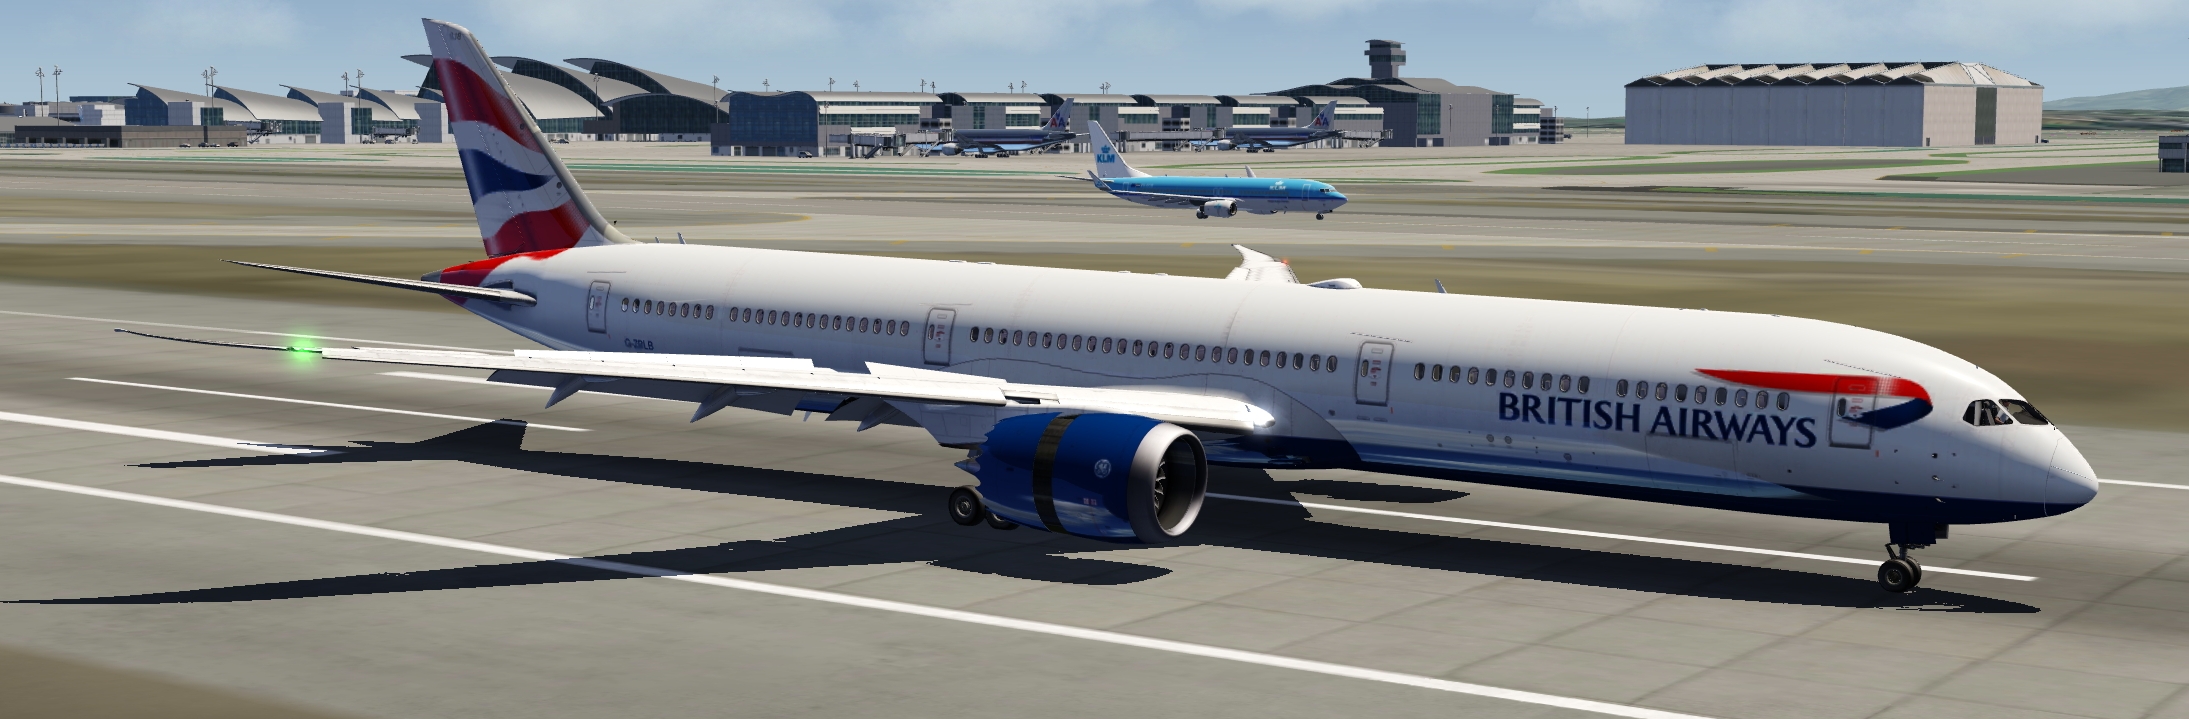 Heathrow reached successfully with the B787